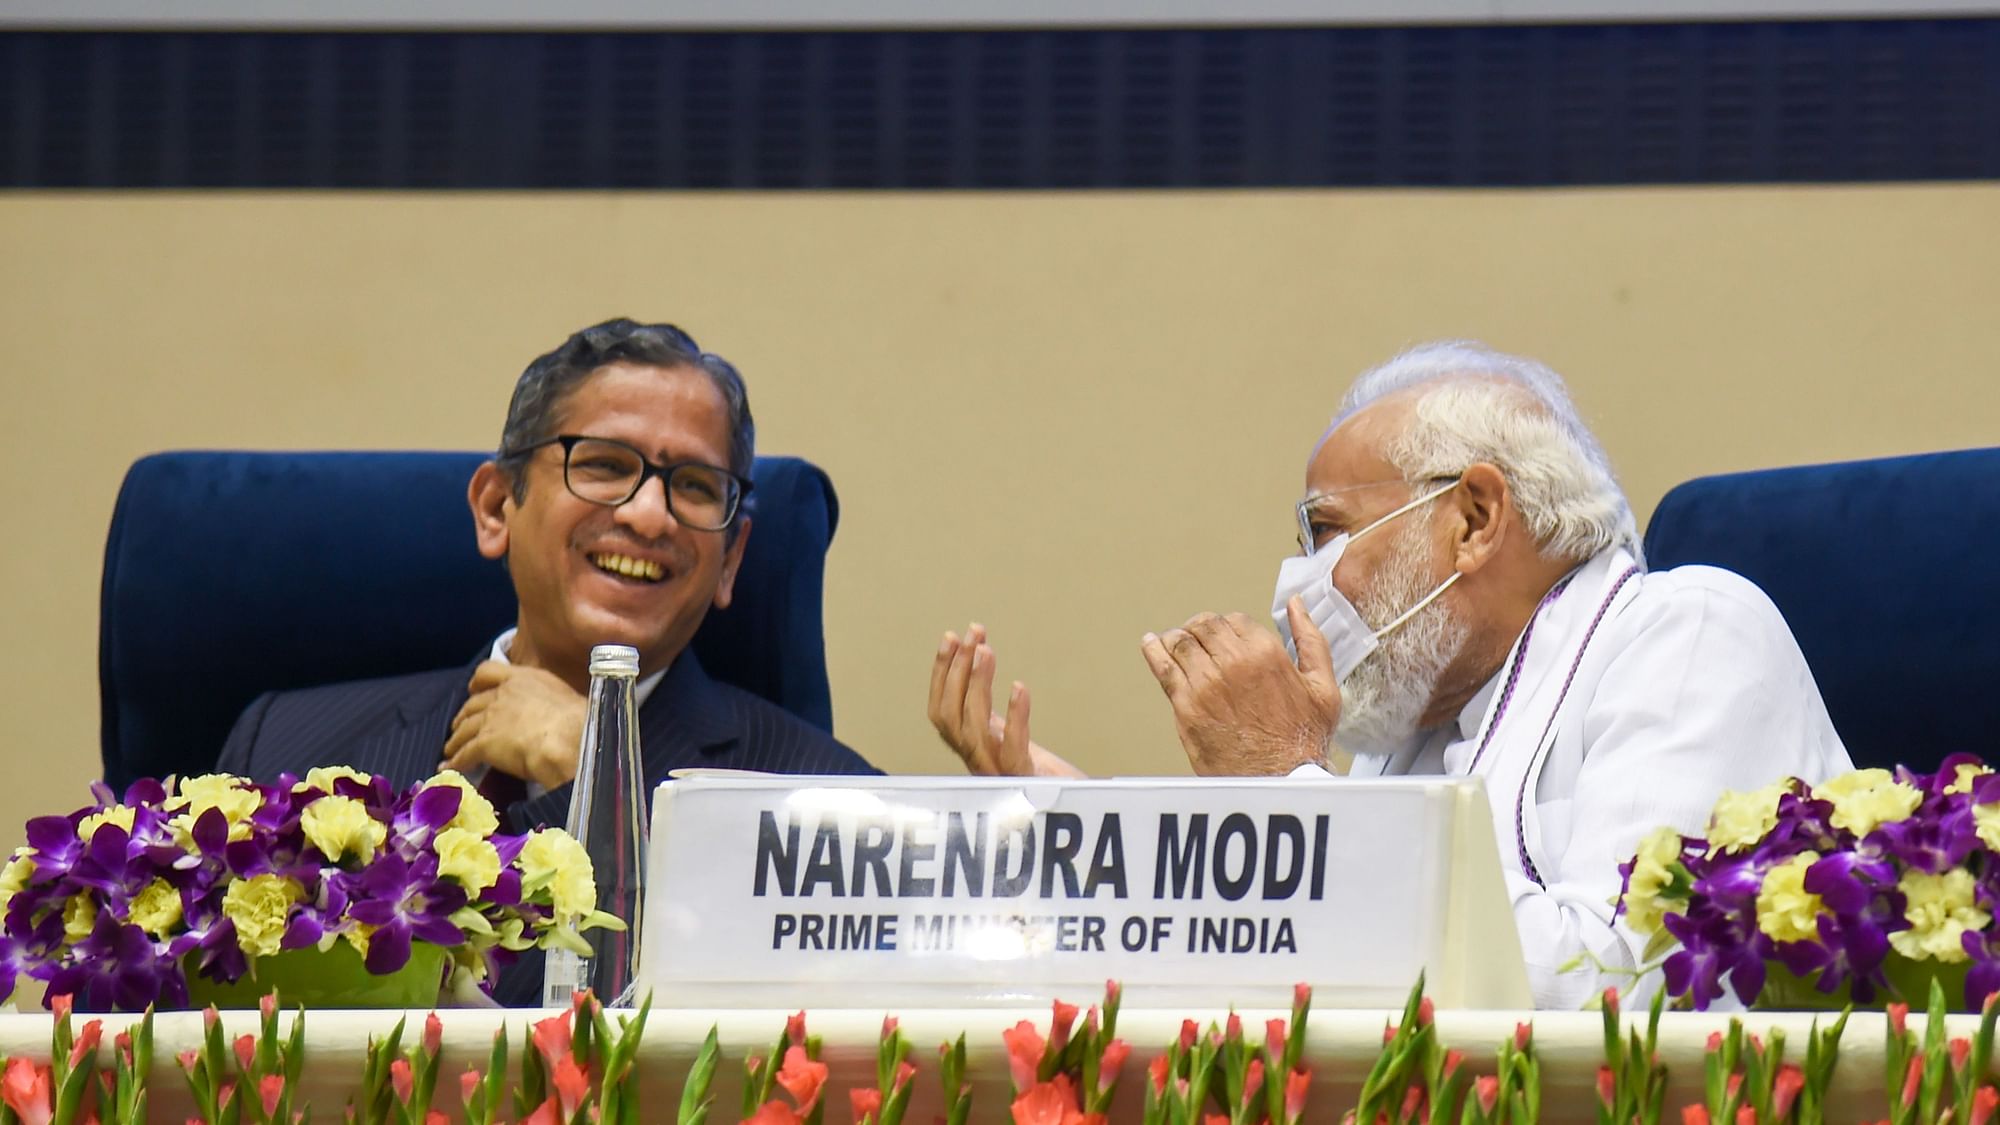 <div class="paragraphs"><p>Prime Minister Narendra Modi with Chief Justice of India NV Ramana during a joint conference of CMs of States and Chief Justices of High Courts, at Vigyan Bhawan in New Delhi, Saturday, 30 April.</p></div>